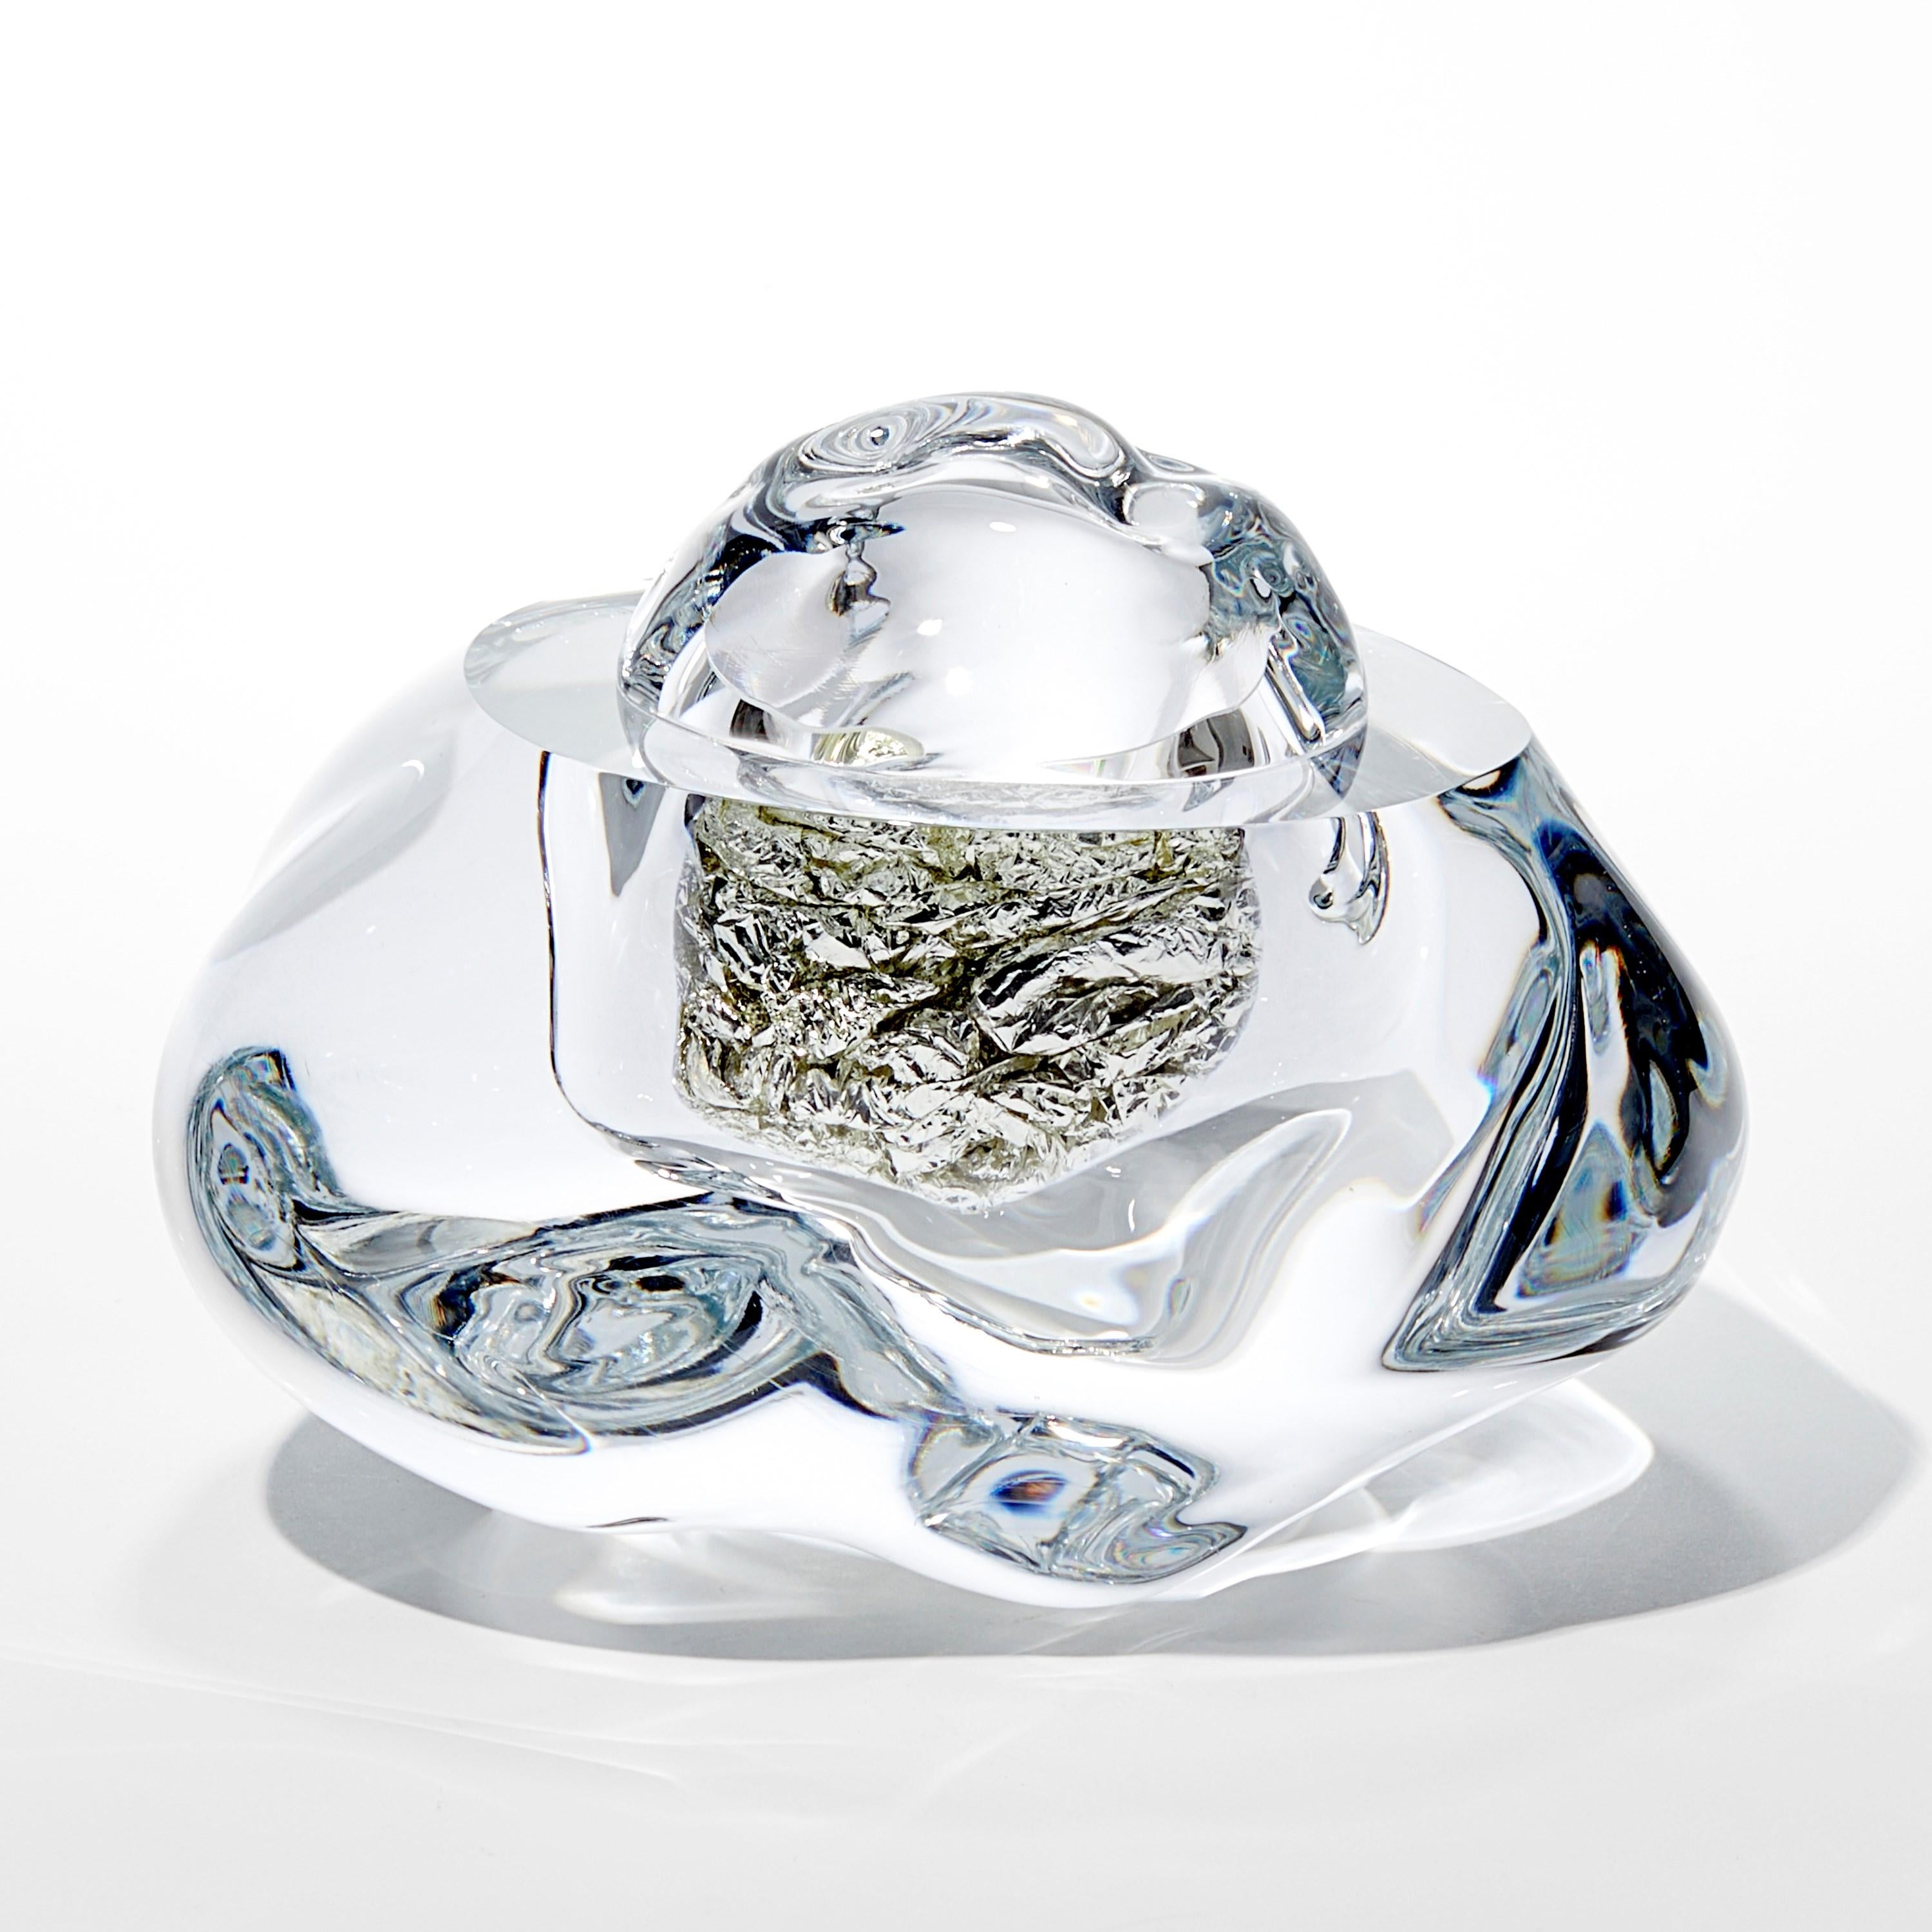 Hand-Crafted Erratic K with 12ct White Gold, optical glass sculpture by Anthony Scala